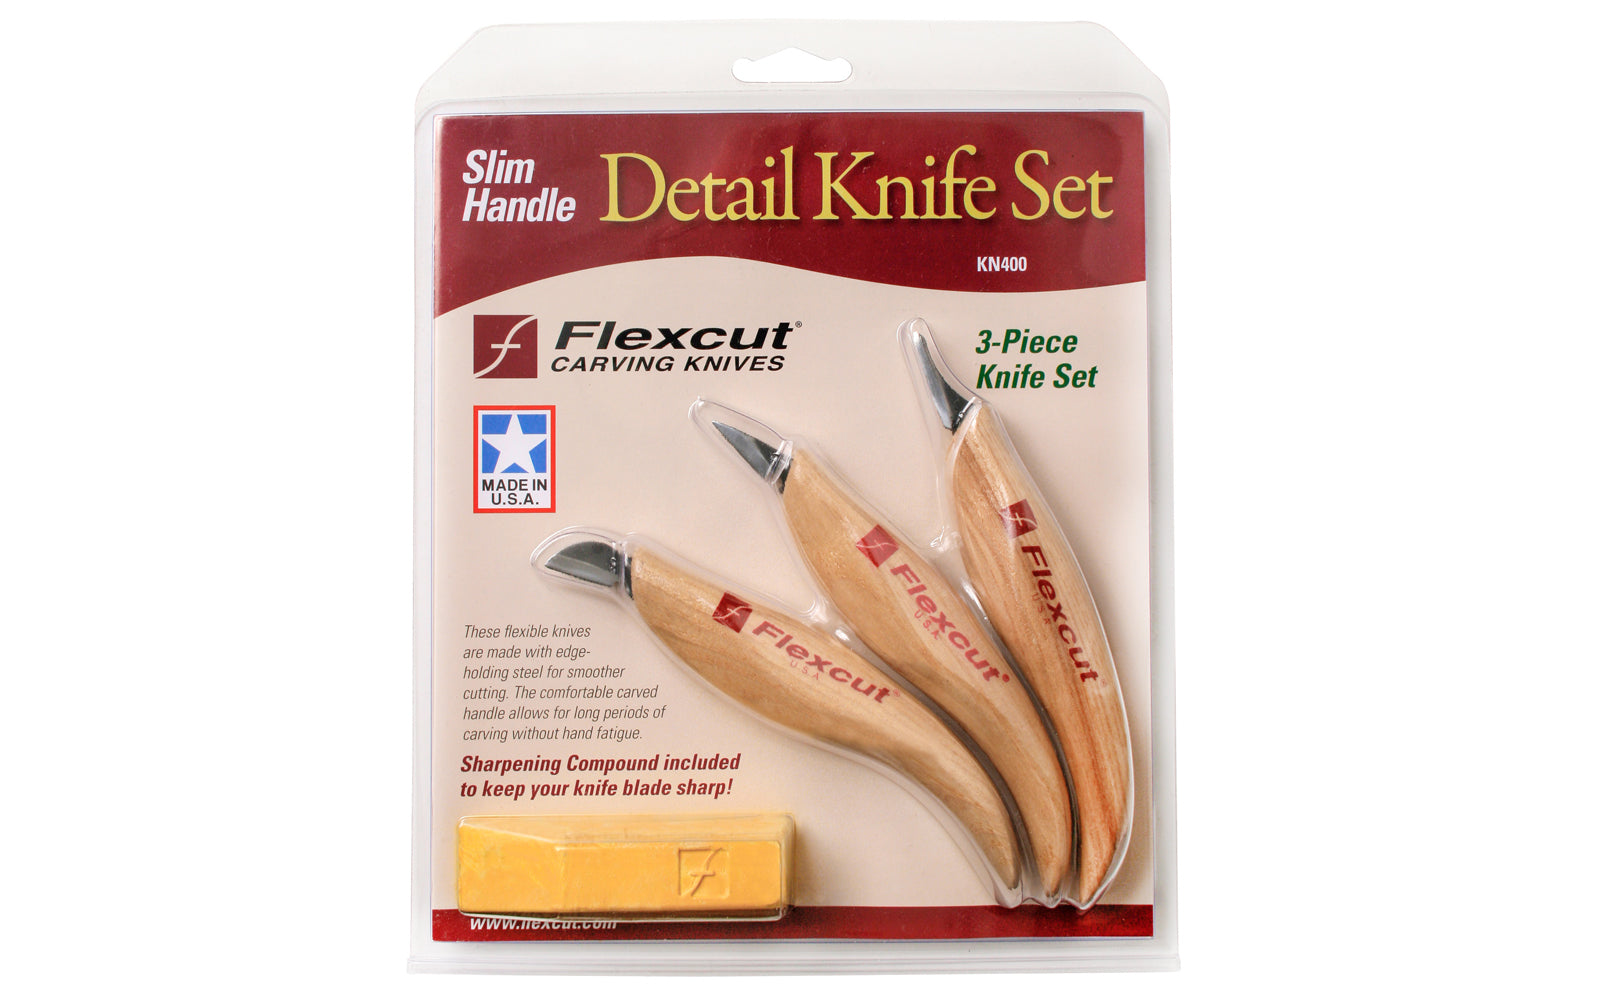 Flexcut Detail Knife Carving Kit ~ KN400 - Made in USA ~ KN19 Mini Pelican Knife, KN27 Mini-Detail Knife, & KN20 Mini-Chip Carving Knife - Detail Knife Kit - Three piece set ~ 3-knife kit ~ Flexcut Fine Detail Knife Set